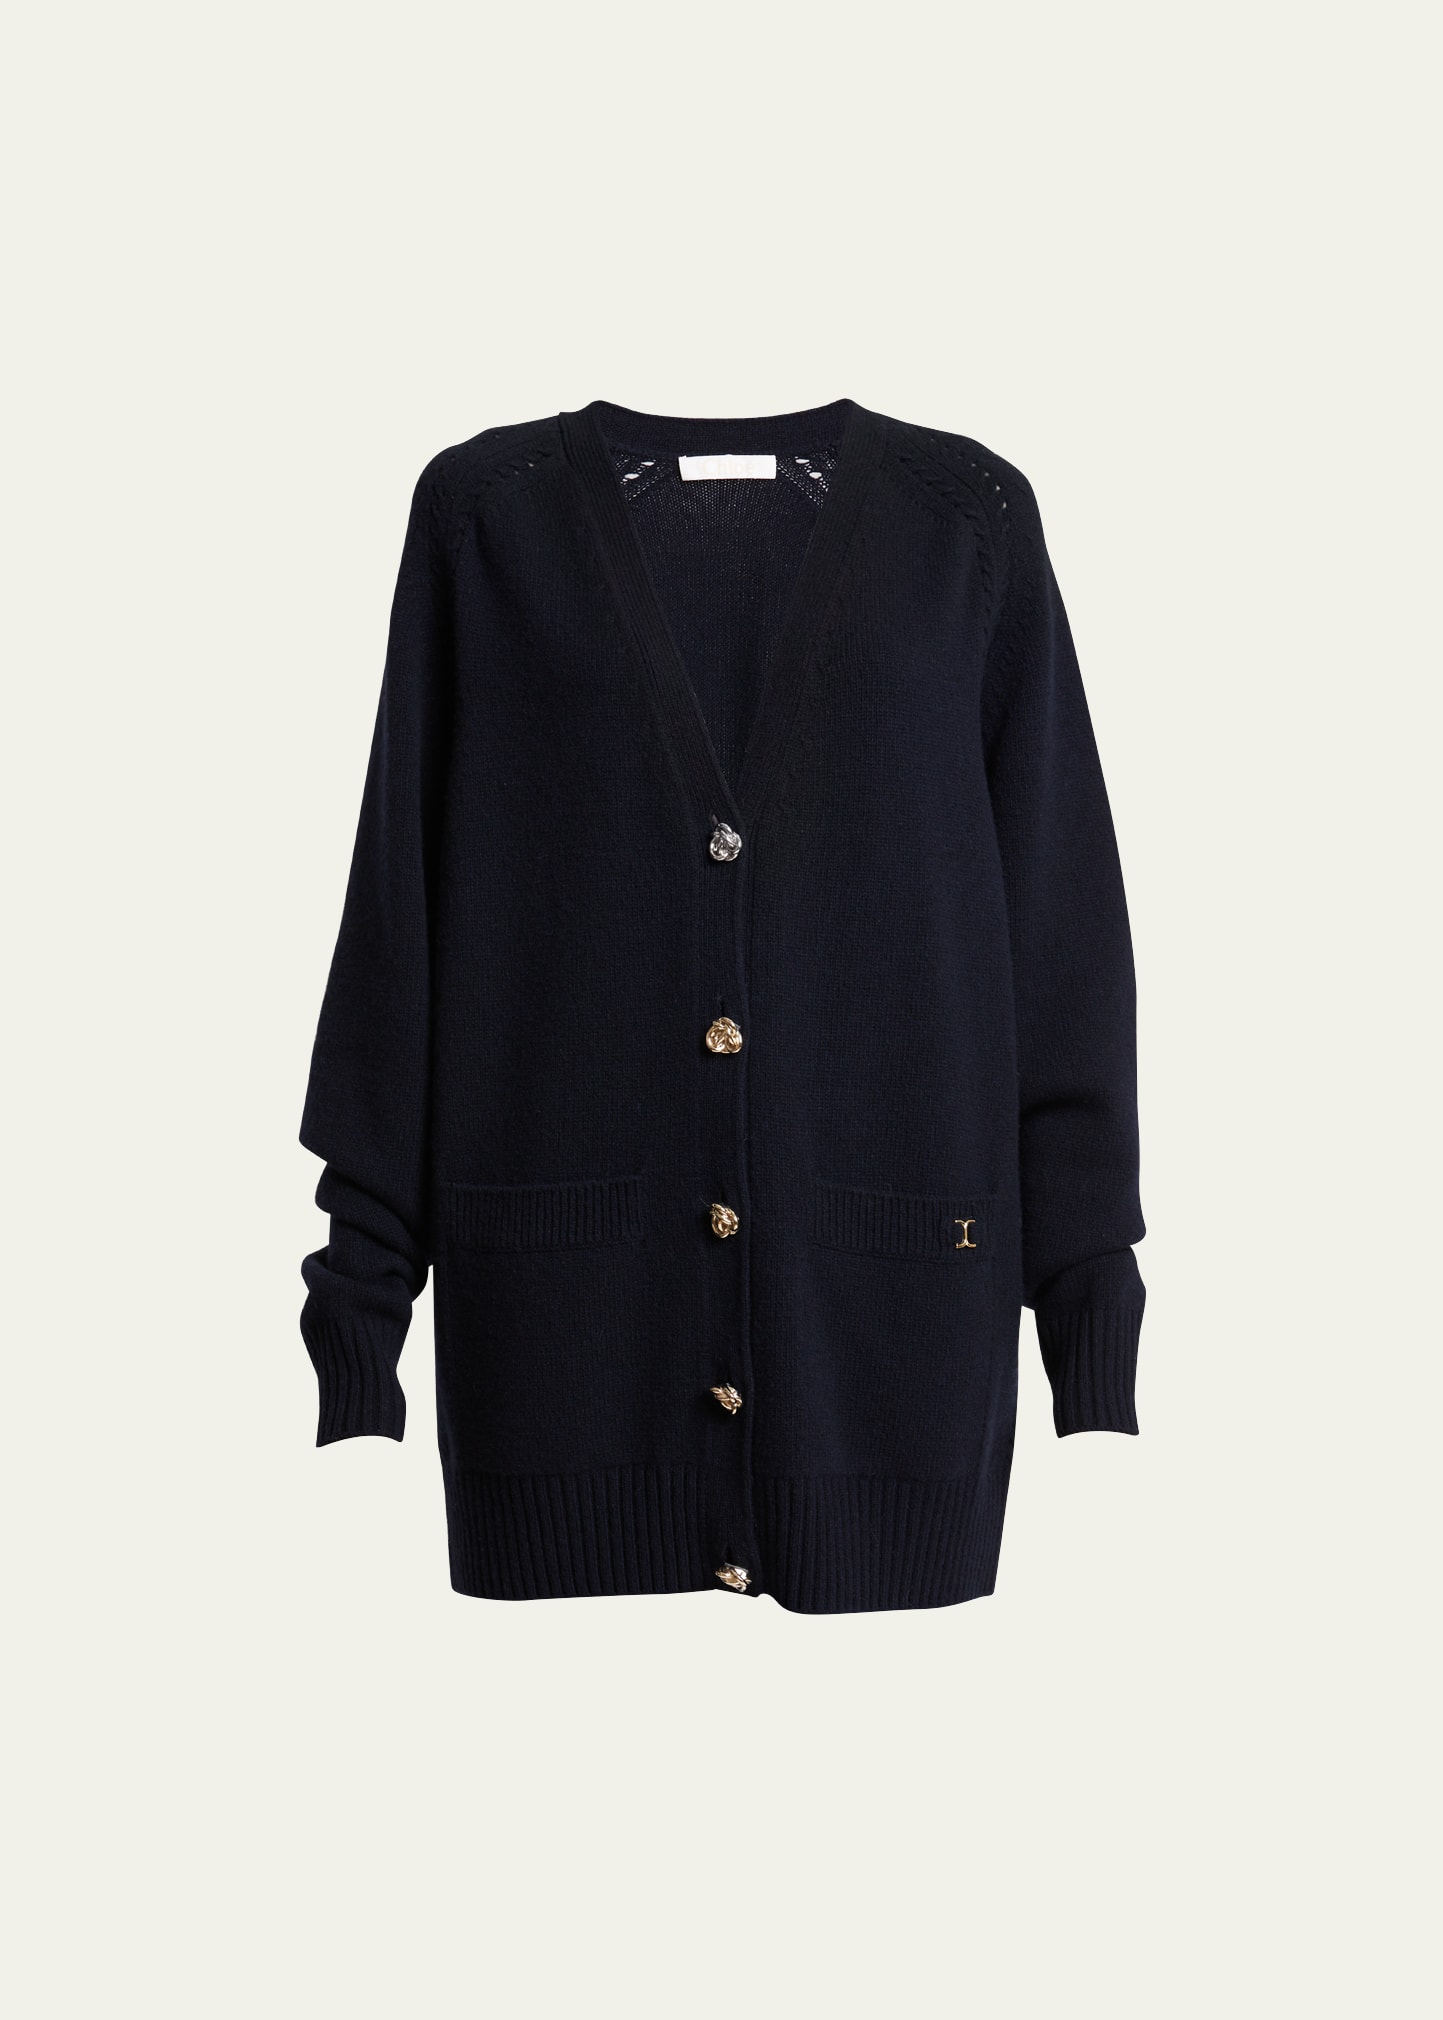 CHLOÉ KNOT-BUTTON RECYCLED CASHMERE CARDIGAN